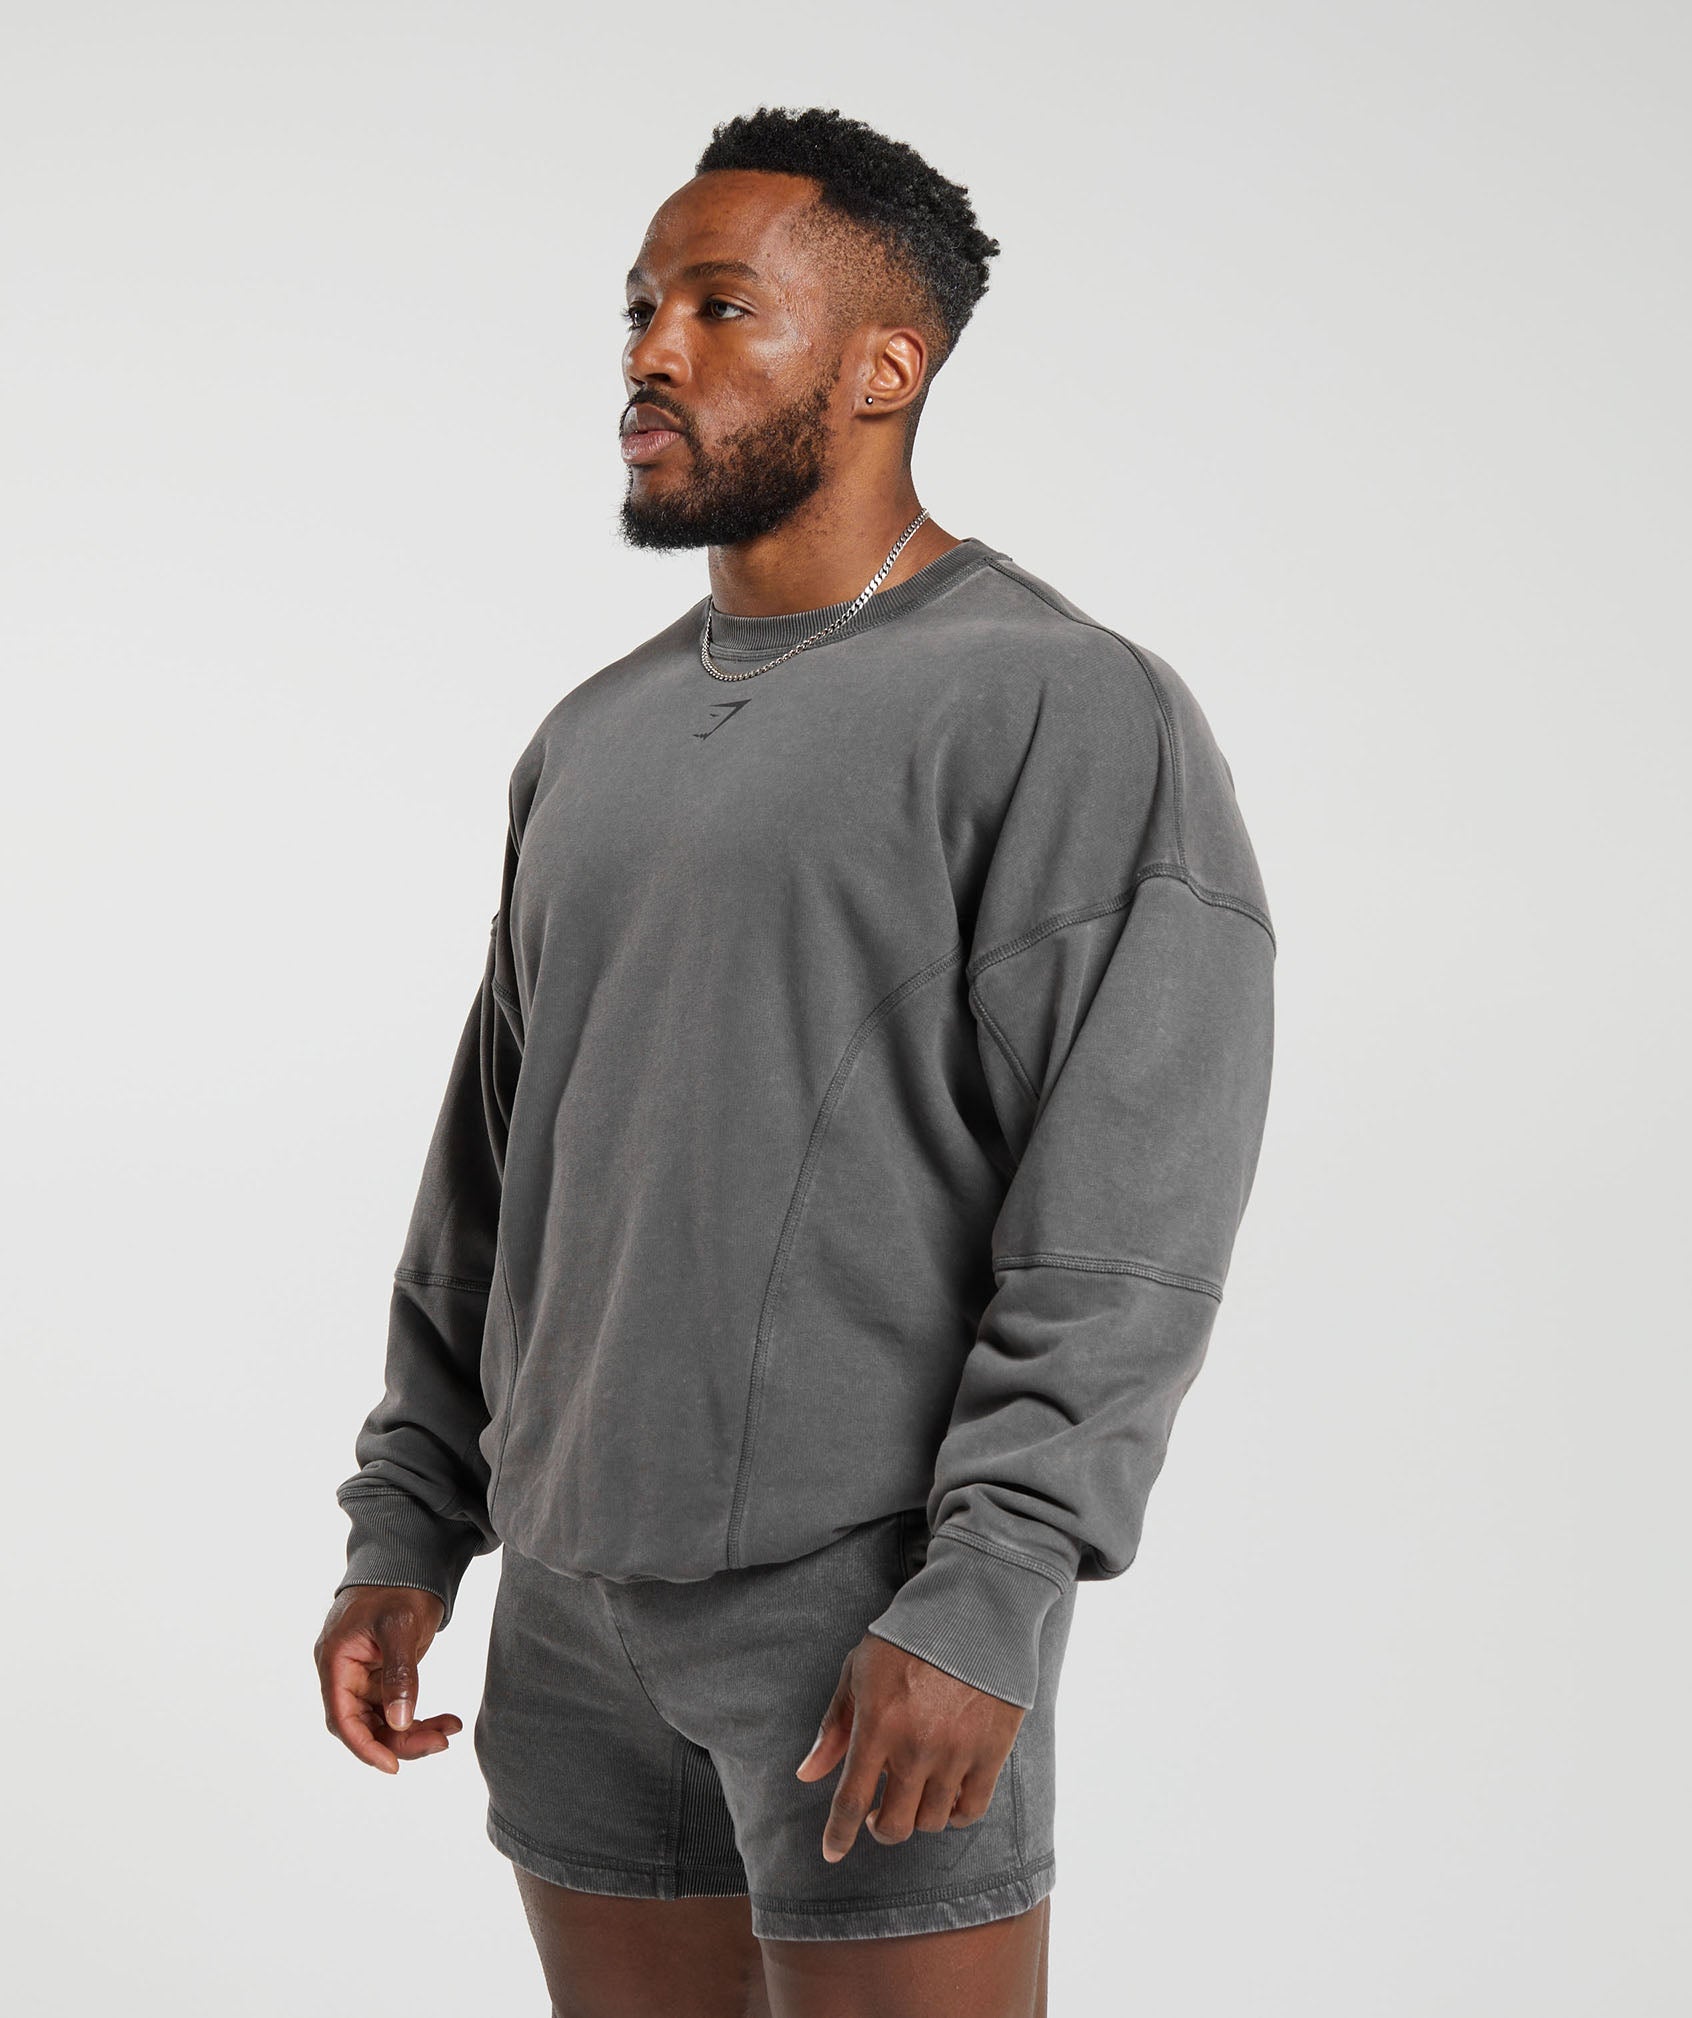 Heritage Washed Crew in Onyx Grey - view 3